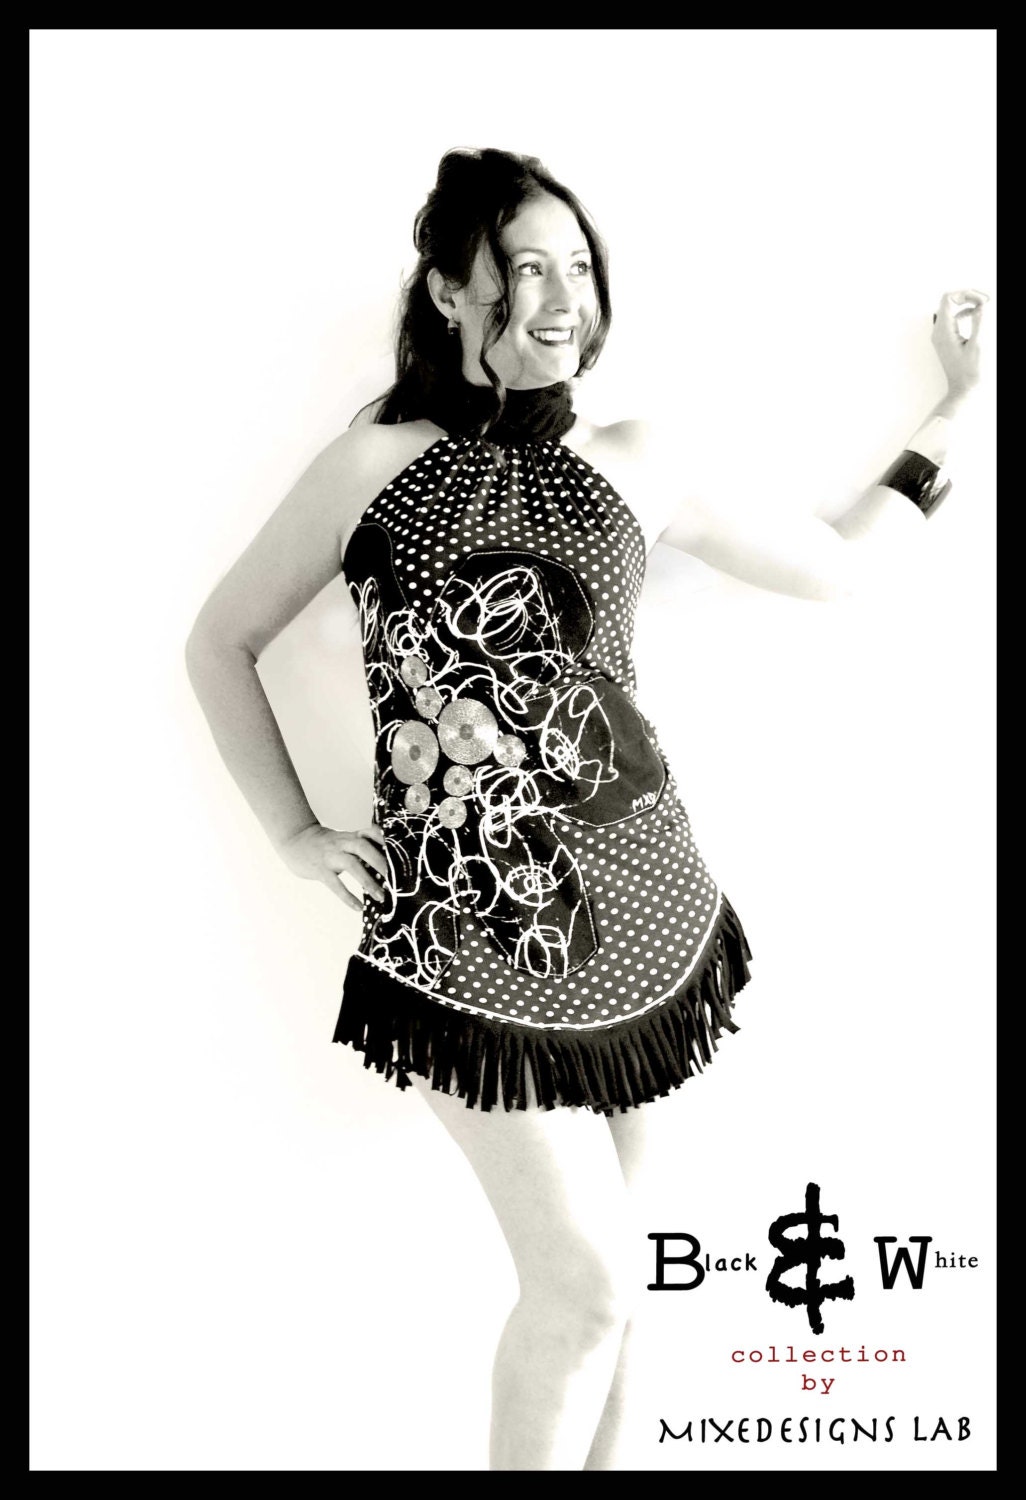 Black and White - retro dress- polka dot Tunic dress w/ Fringes- Big black flower -  by MiXeDesigns lab - MixeDesigns